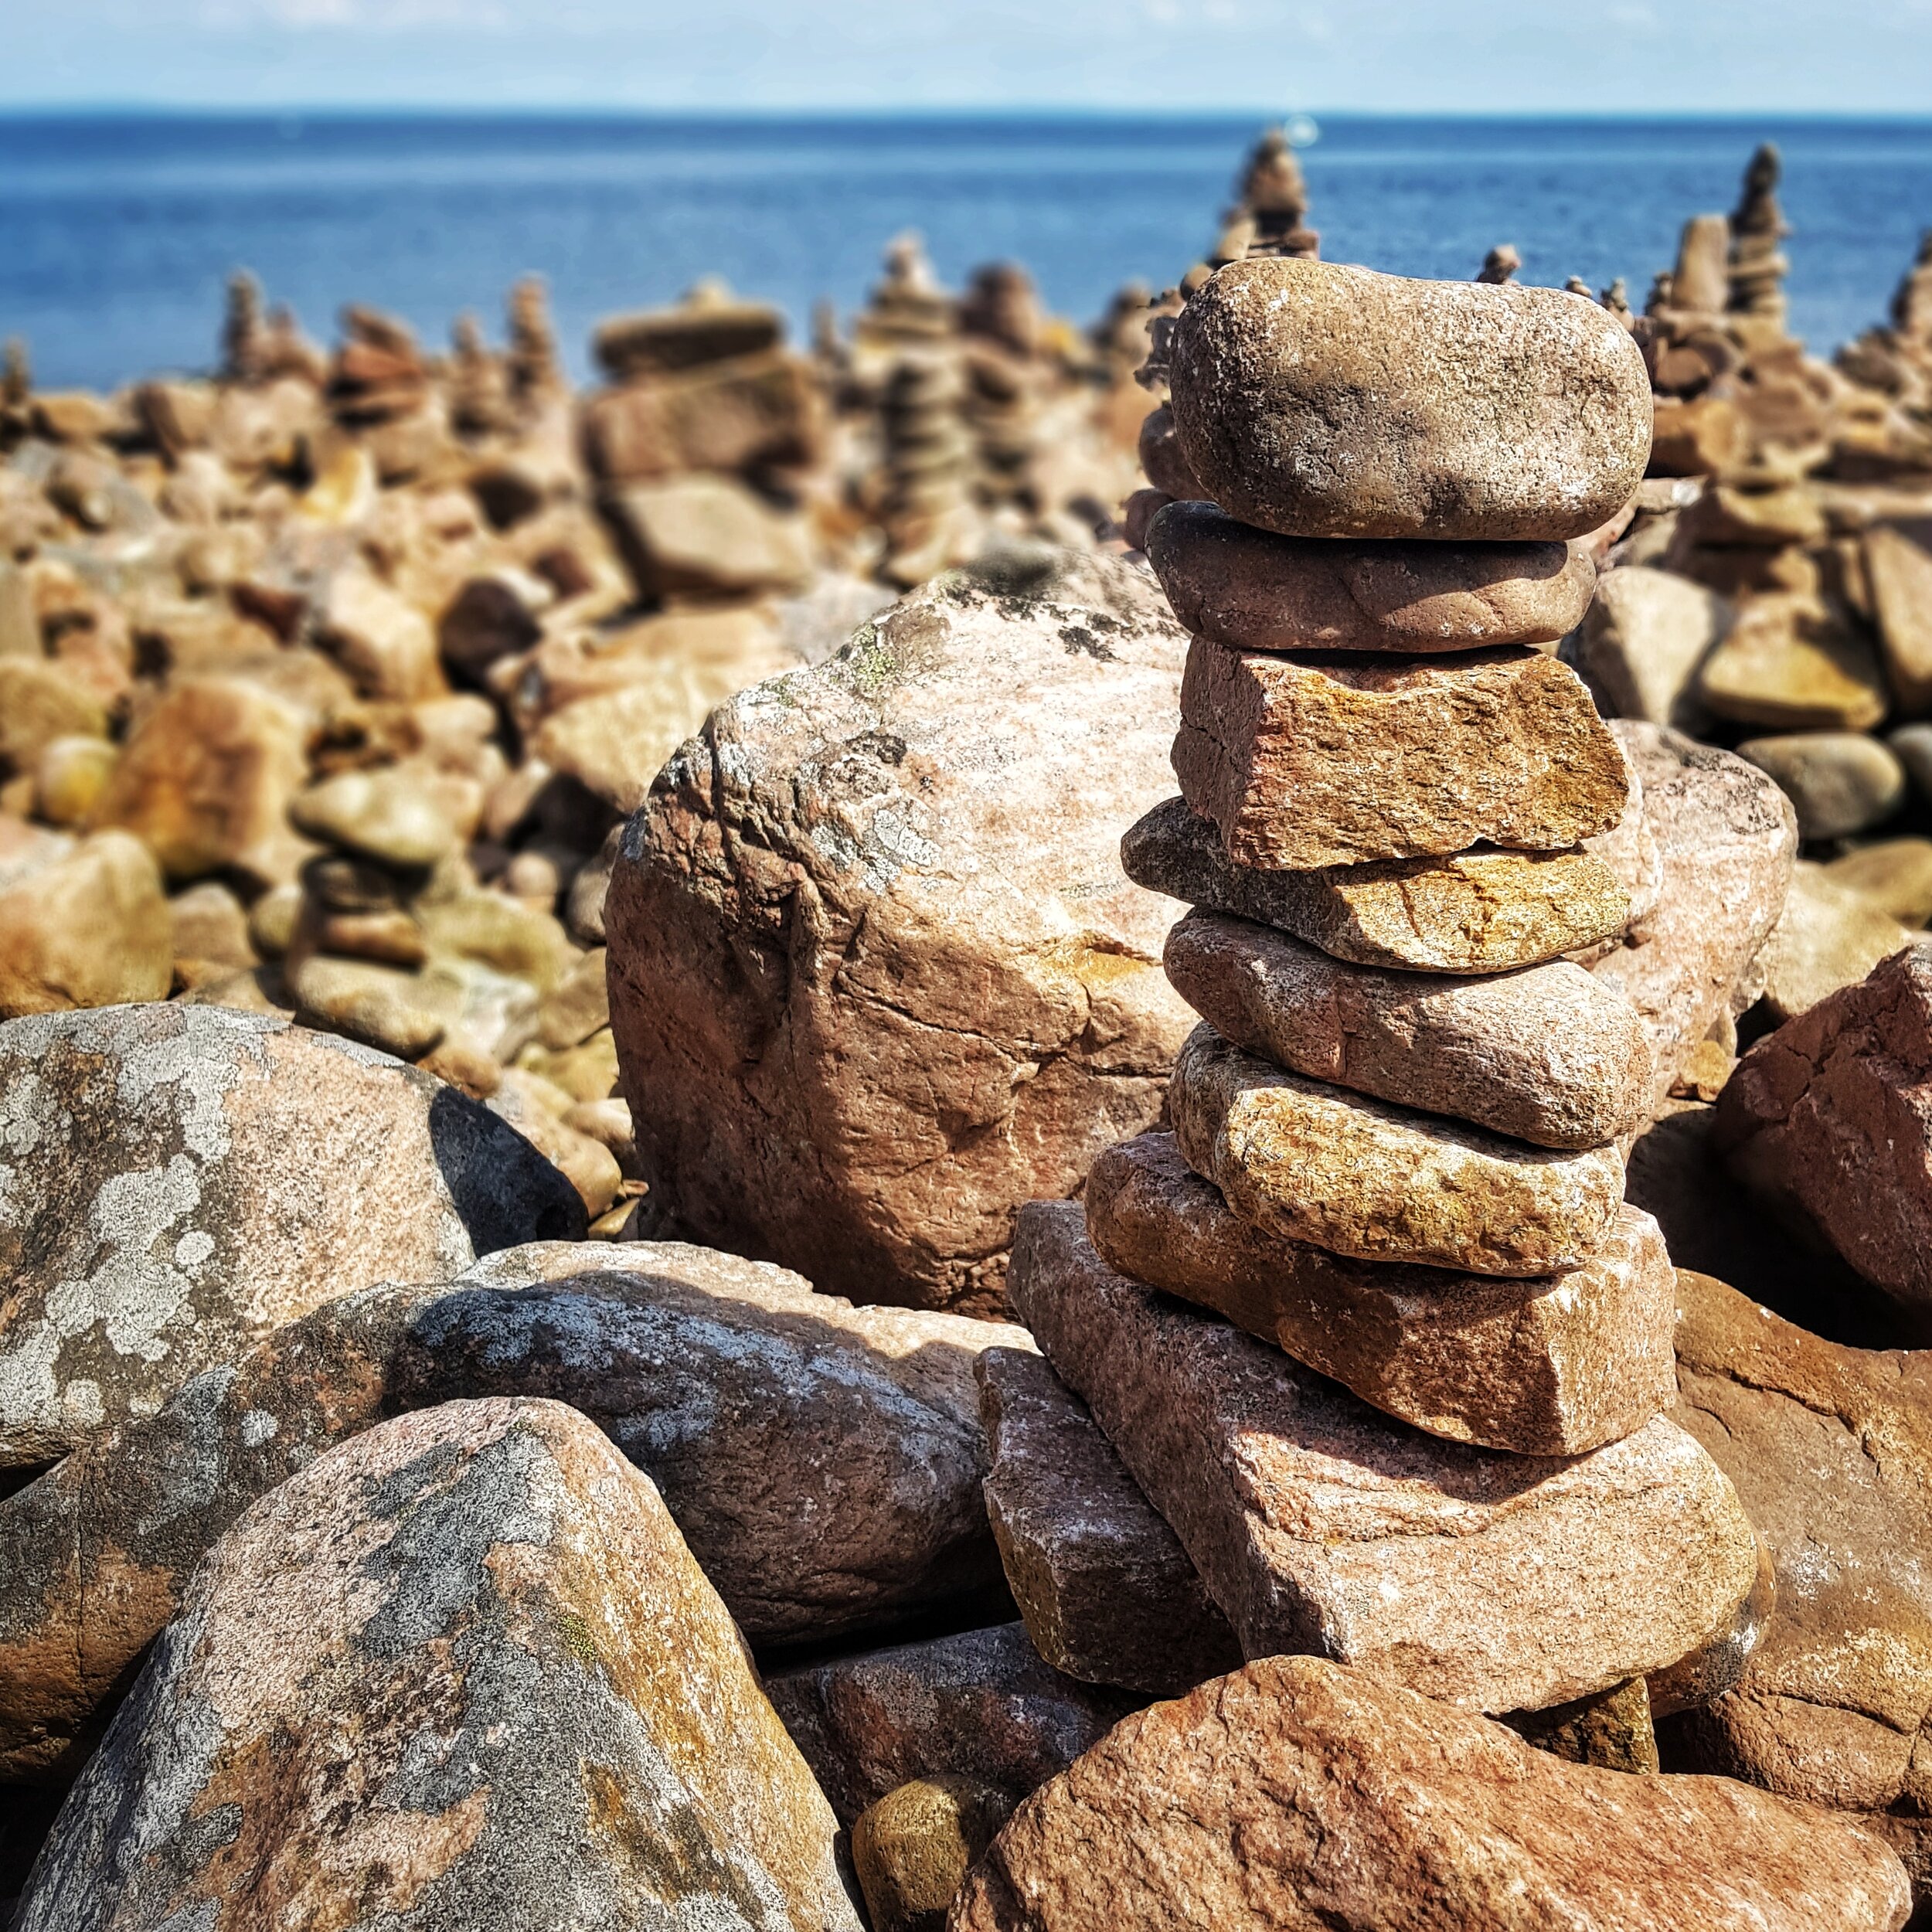 Day 200 - July 18: Stacks of Stone